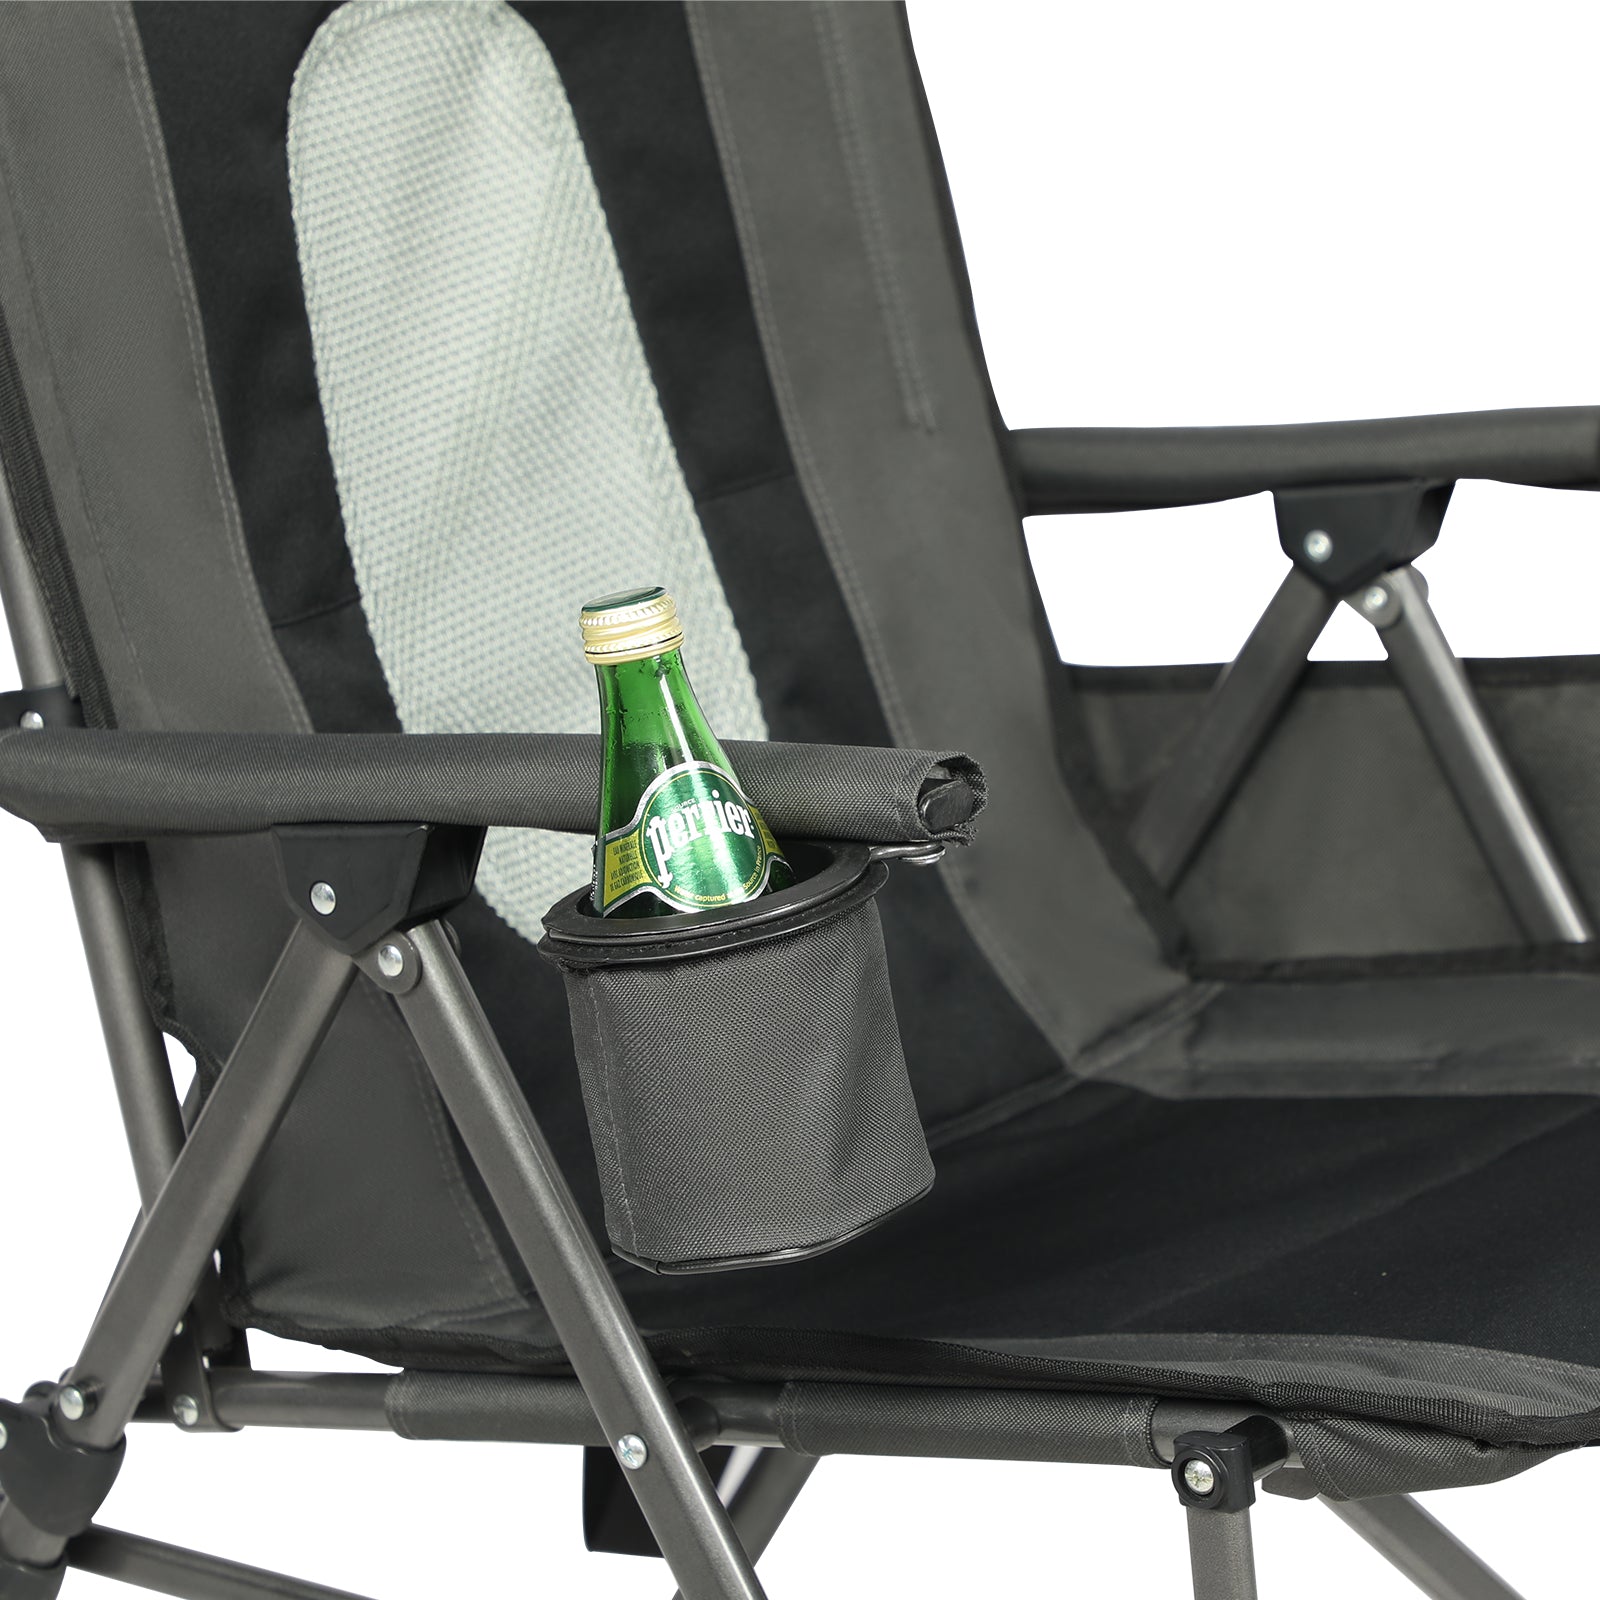 Portal Outdoors High Back Camp Chair